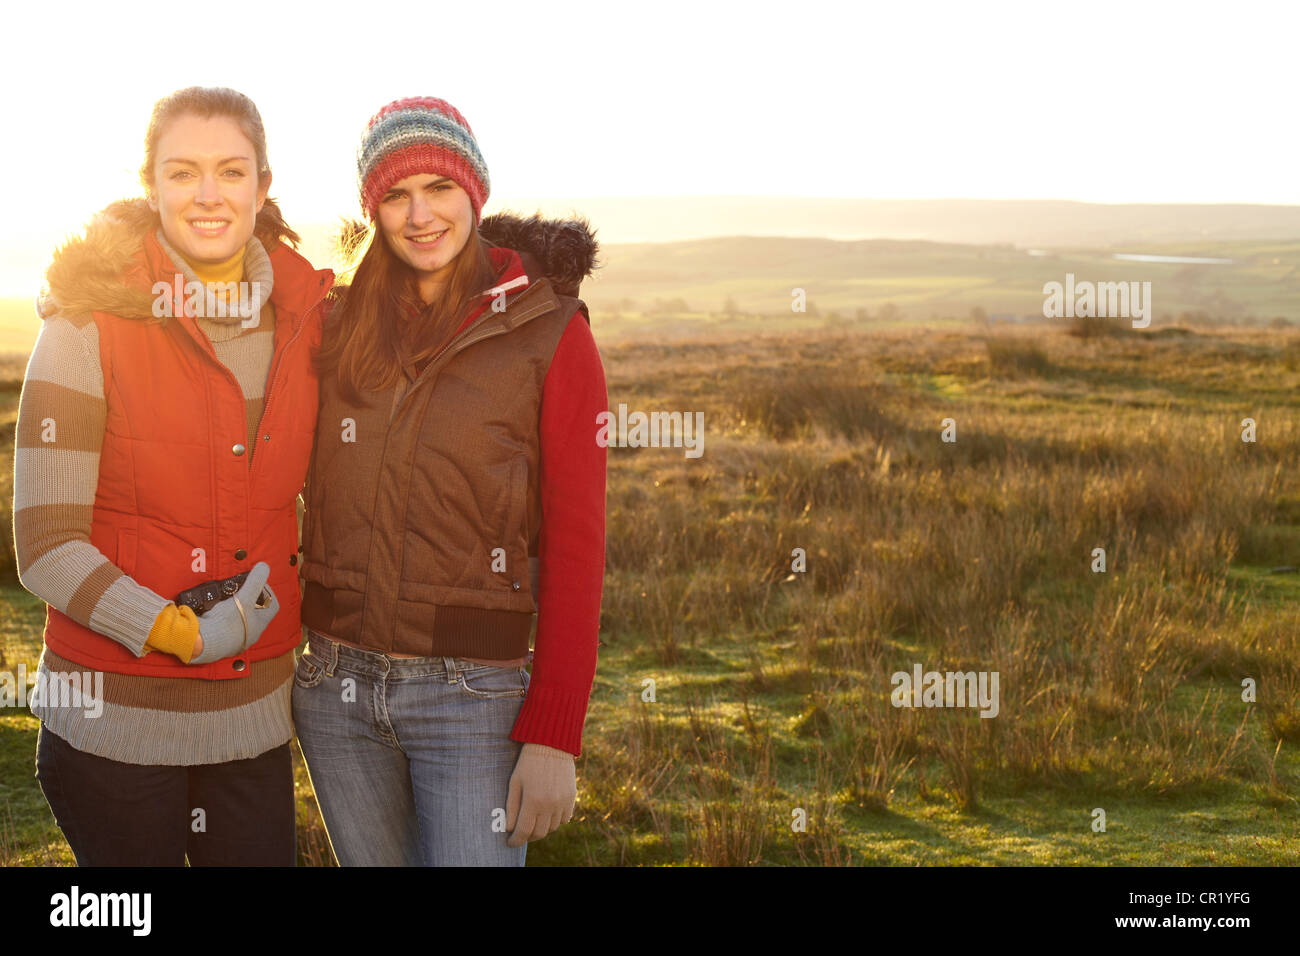 Women smiling together outdoors Stock Photo